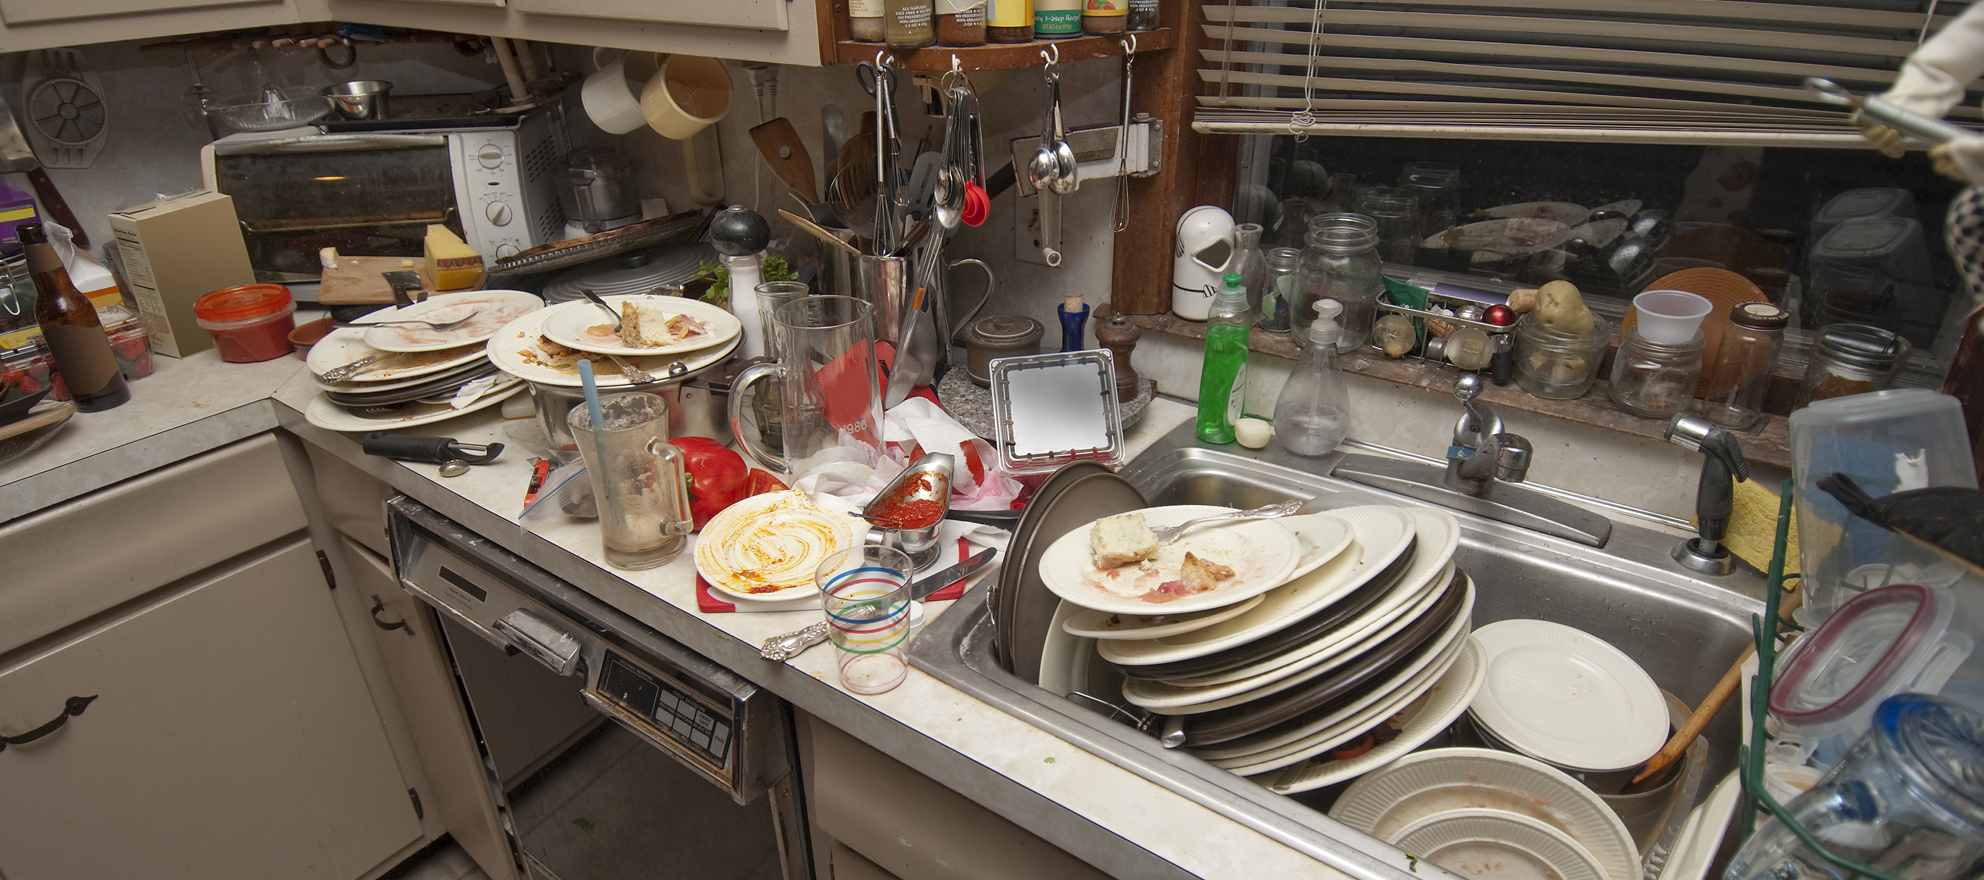 A sink full of filthy dishes.